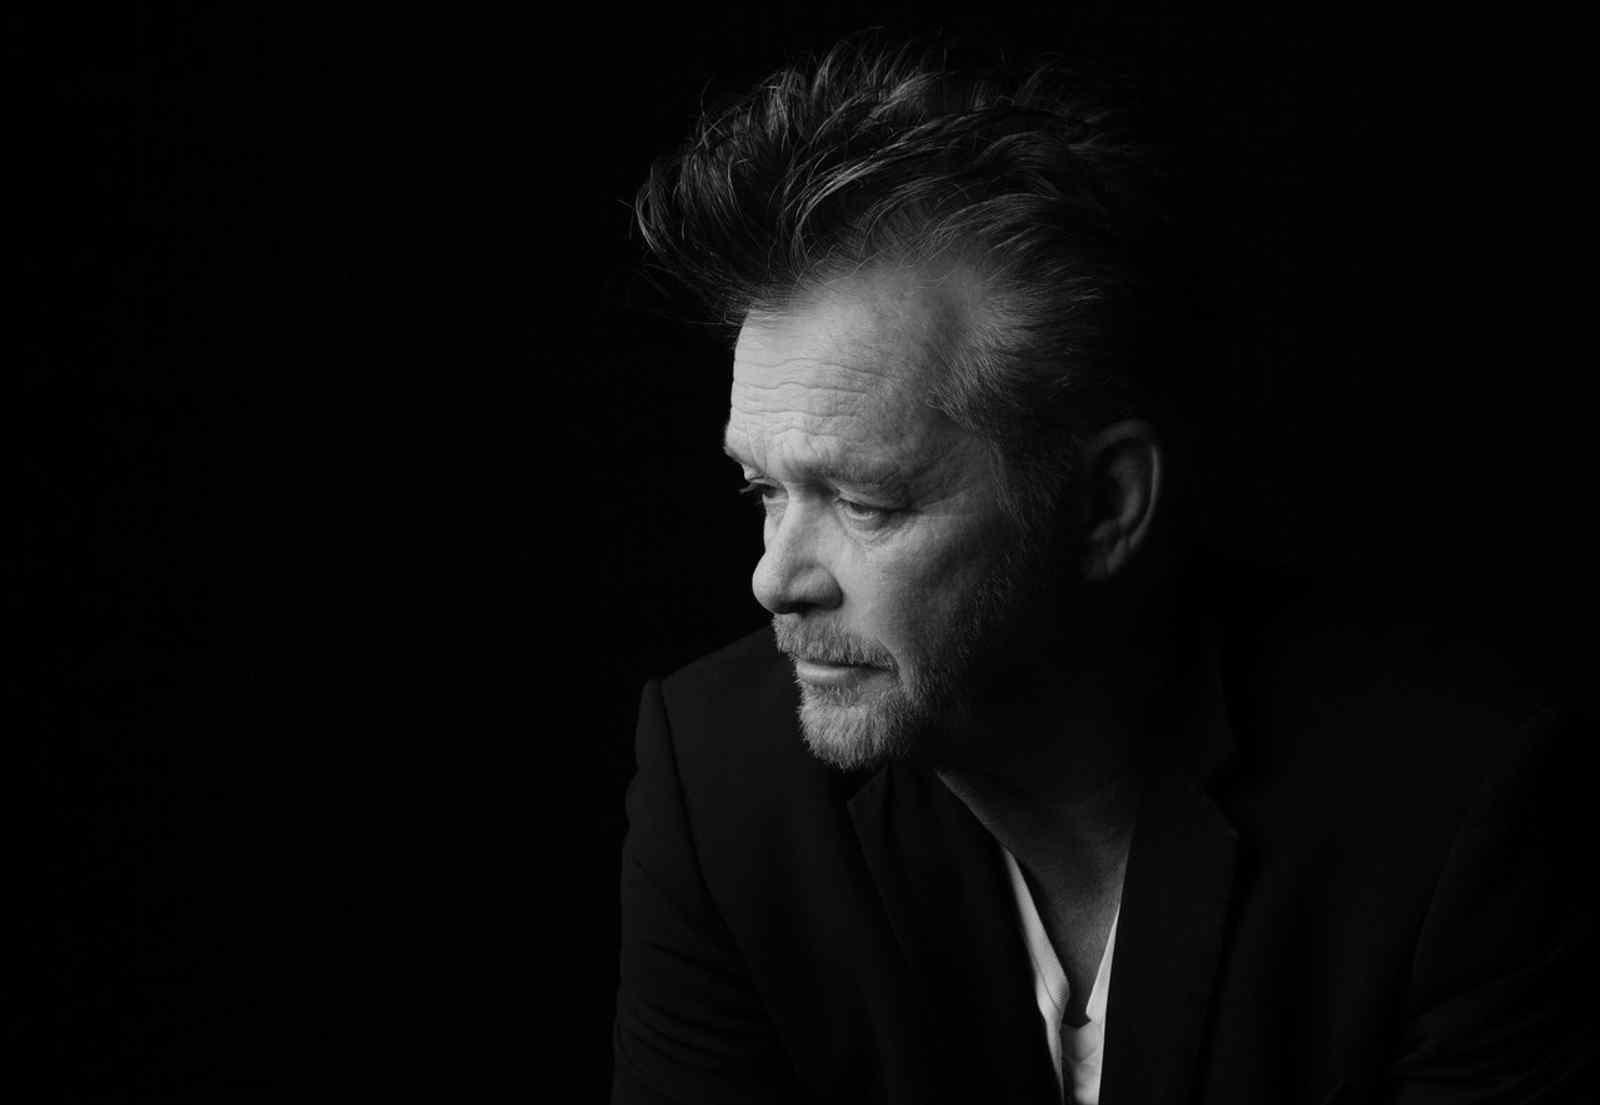 Indianapolis Monthly: John Mellencamp Ain’t Even Done